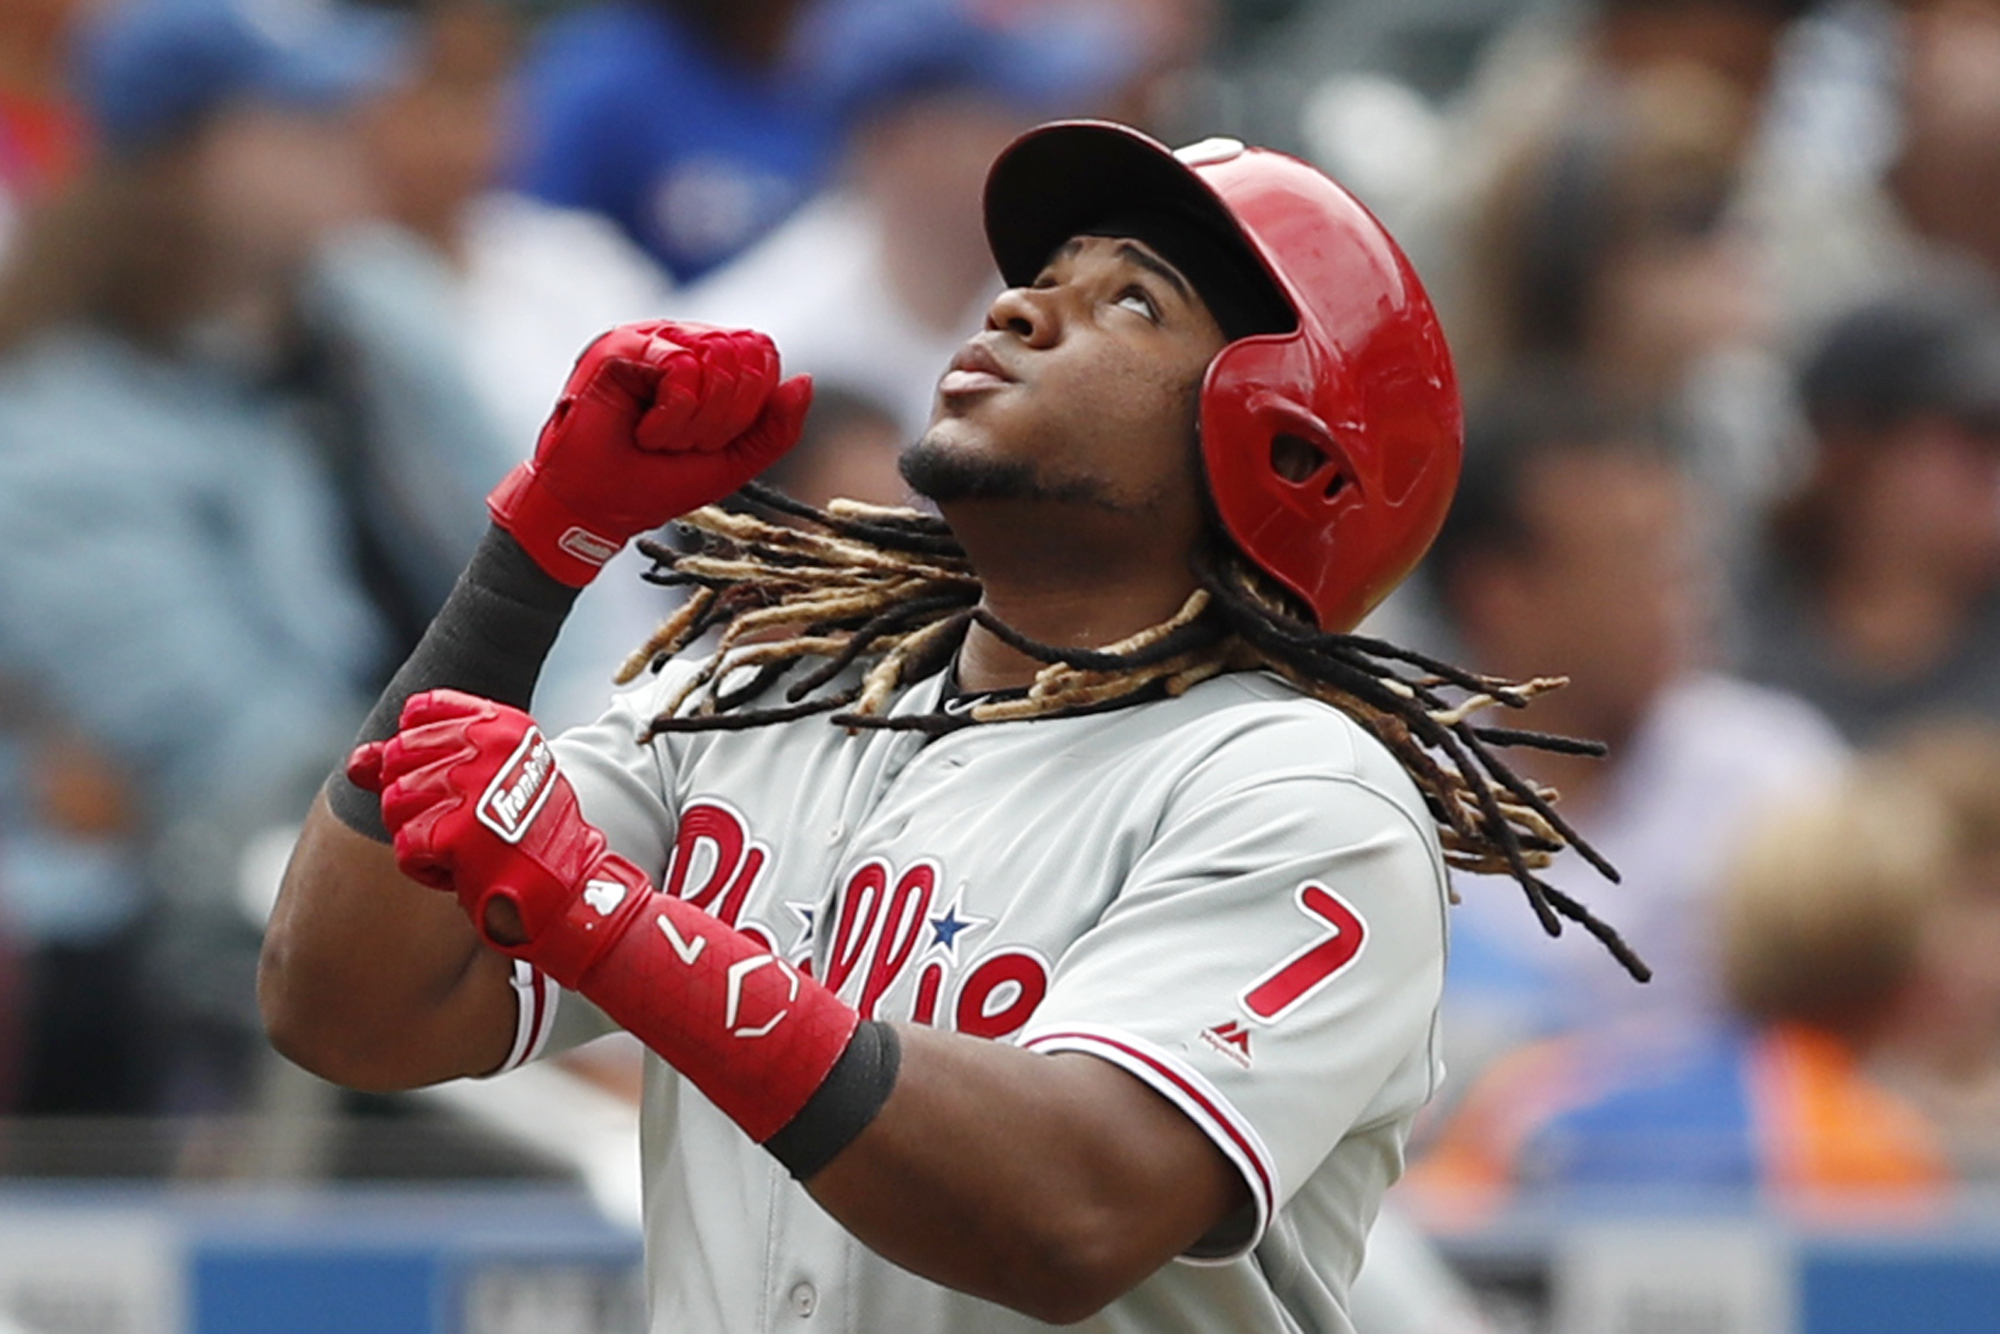 Phils hit 3 HRs, outlast Mets 10-7 to tighten wild-card race